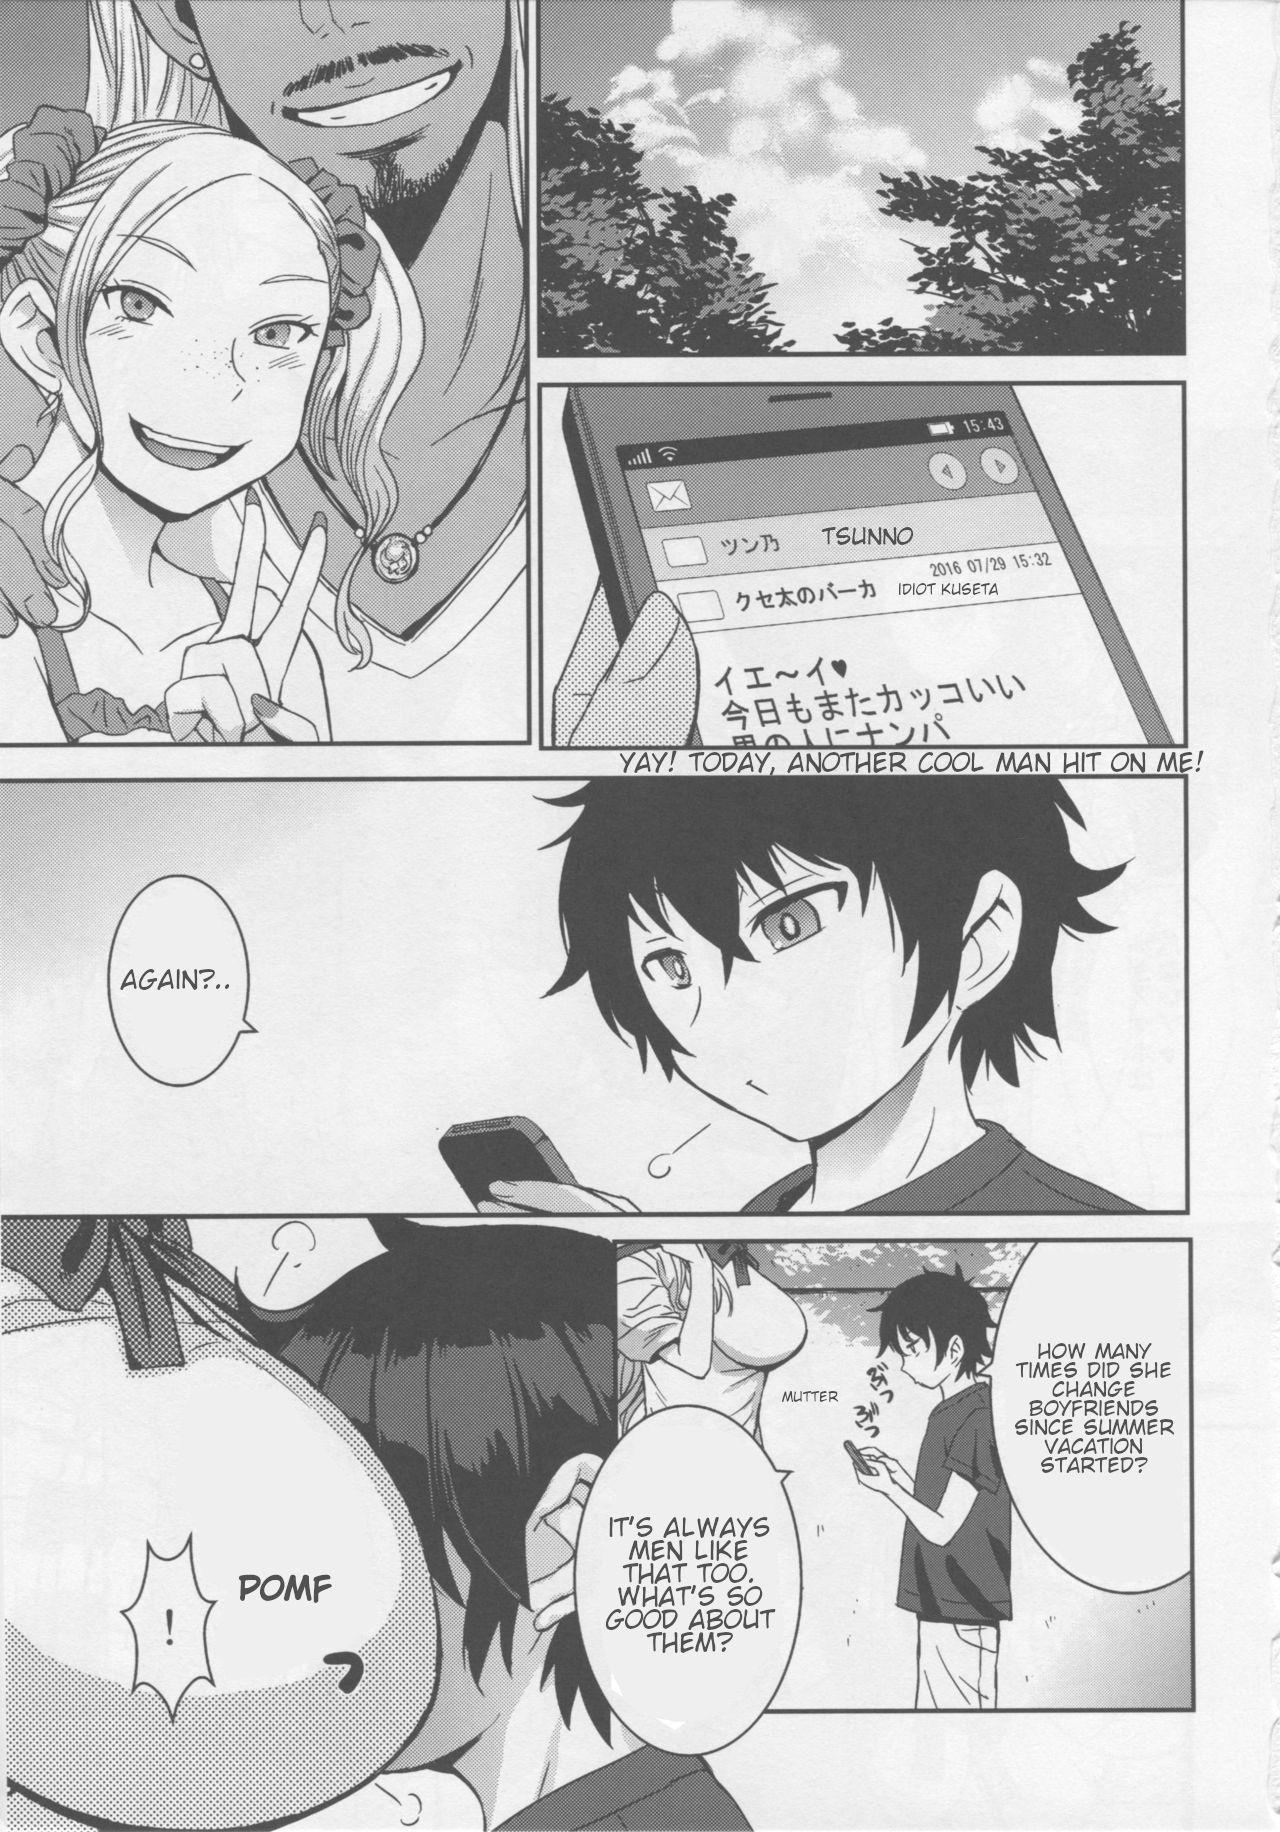 Parties Boy Meets Gal - Oshiete galko chan  - Page 2